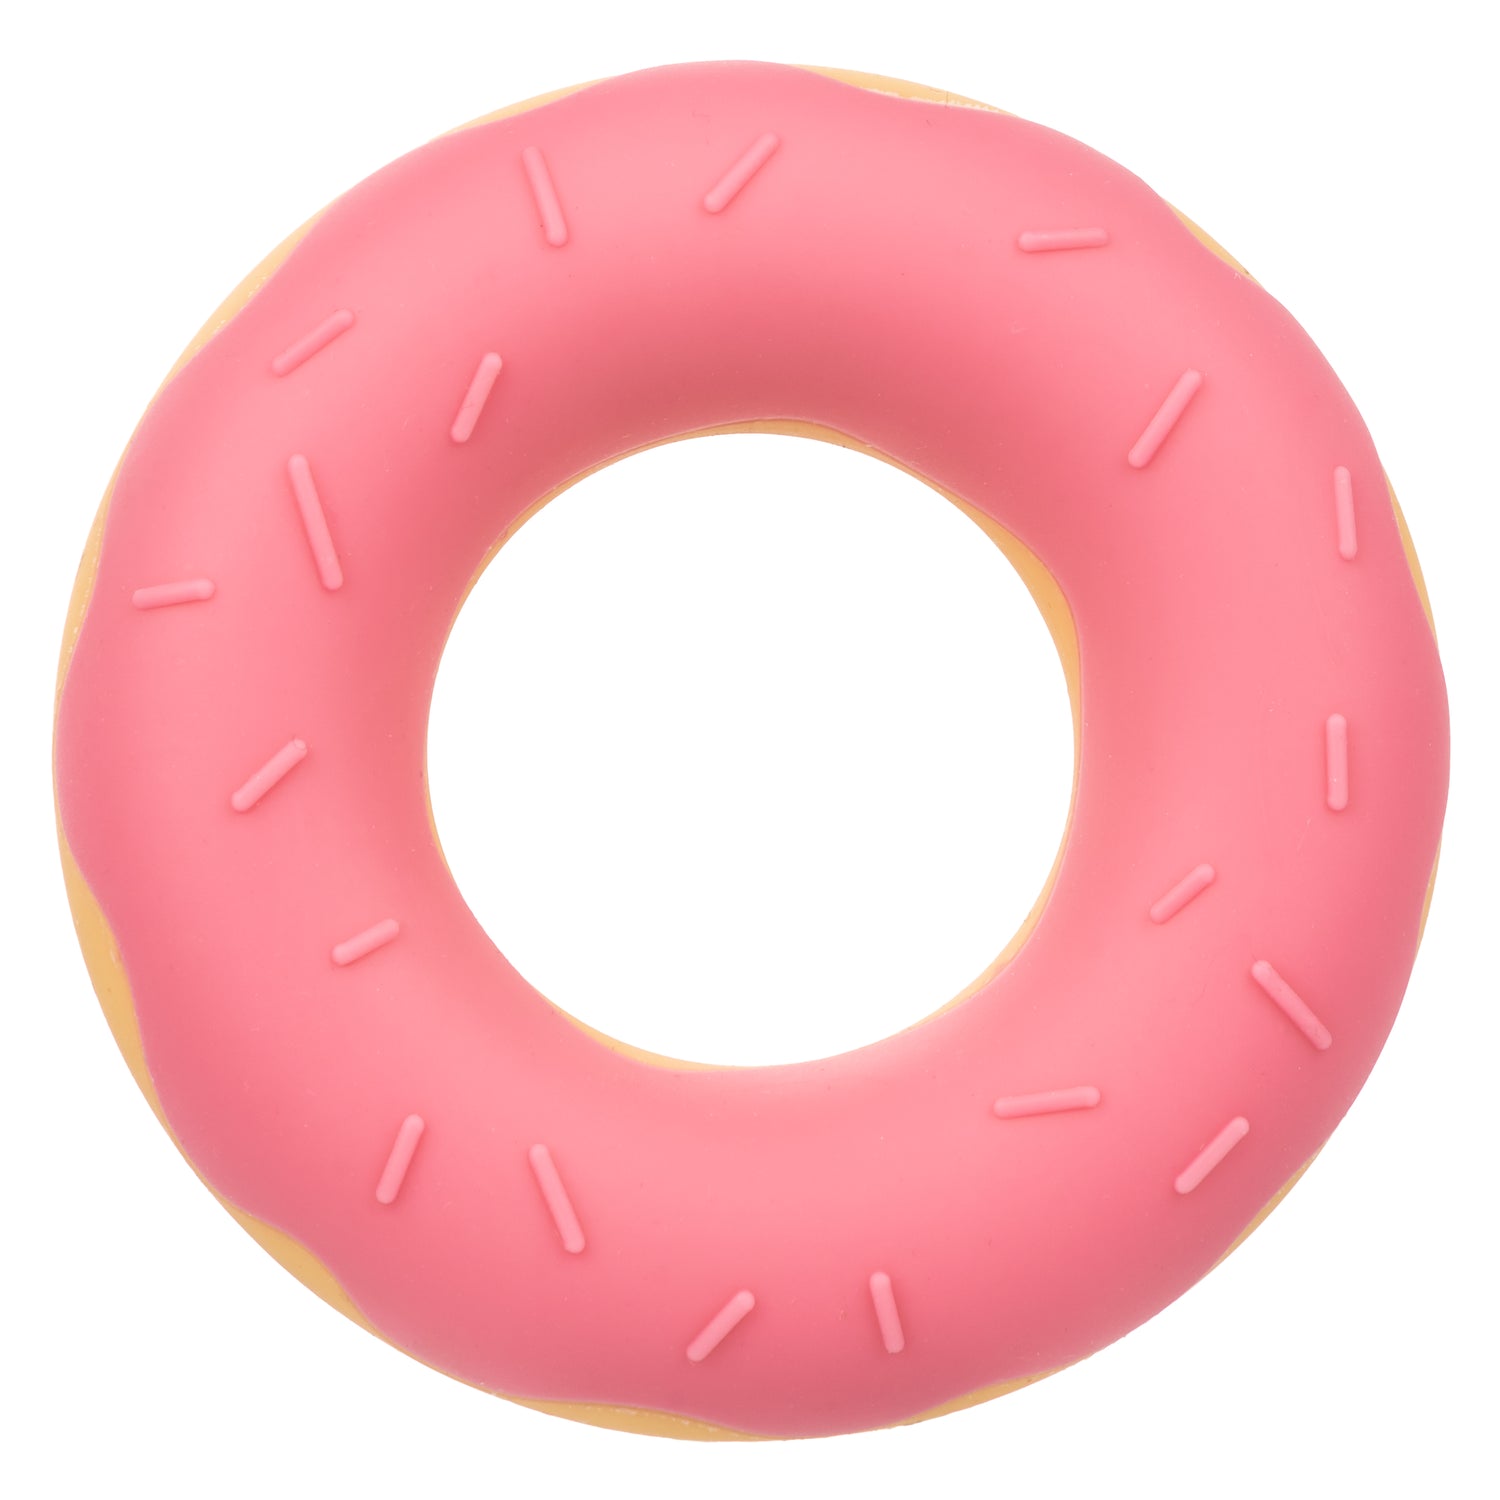 Naughty Bits® Dickin’ Donuts Silicone Donut Cock Ring